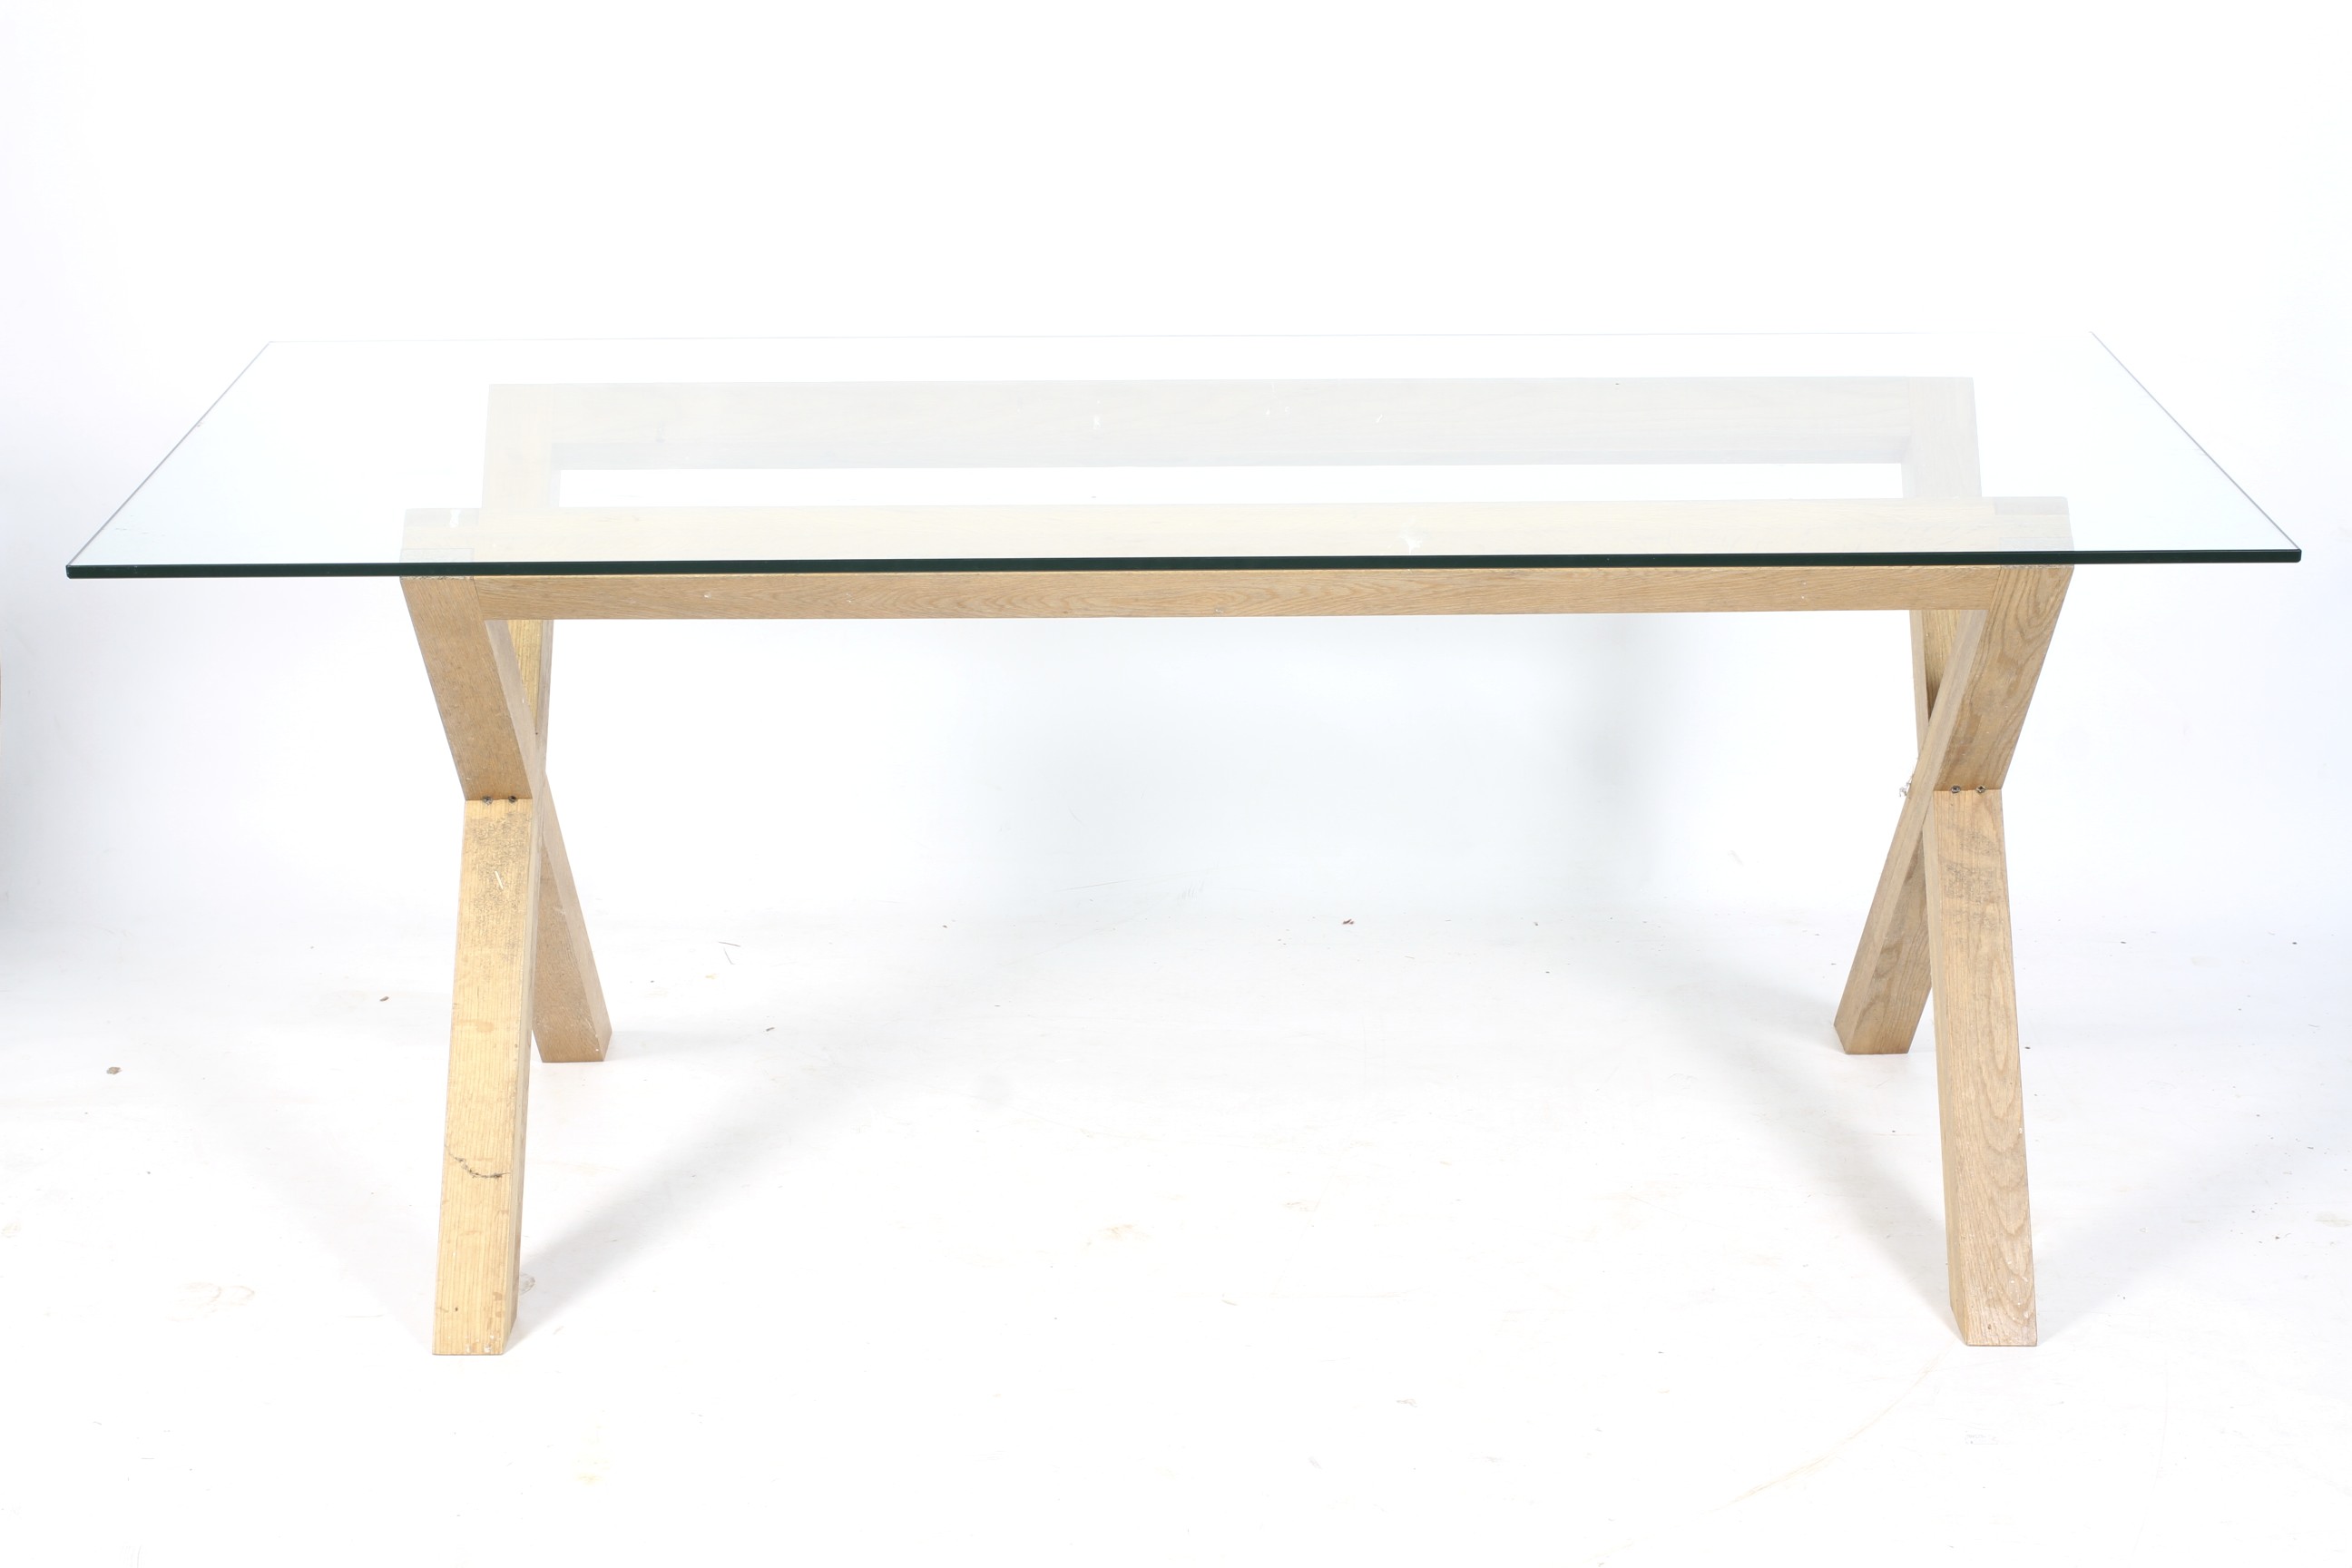 A contemporary glass top dining table. With a wooden X-frame support.